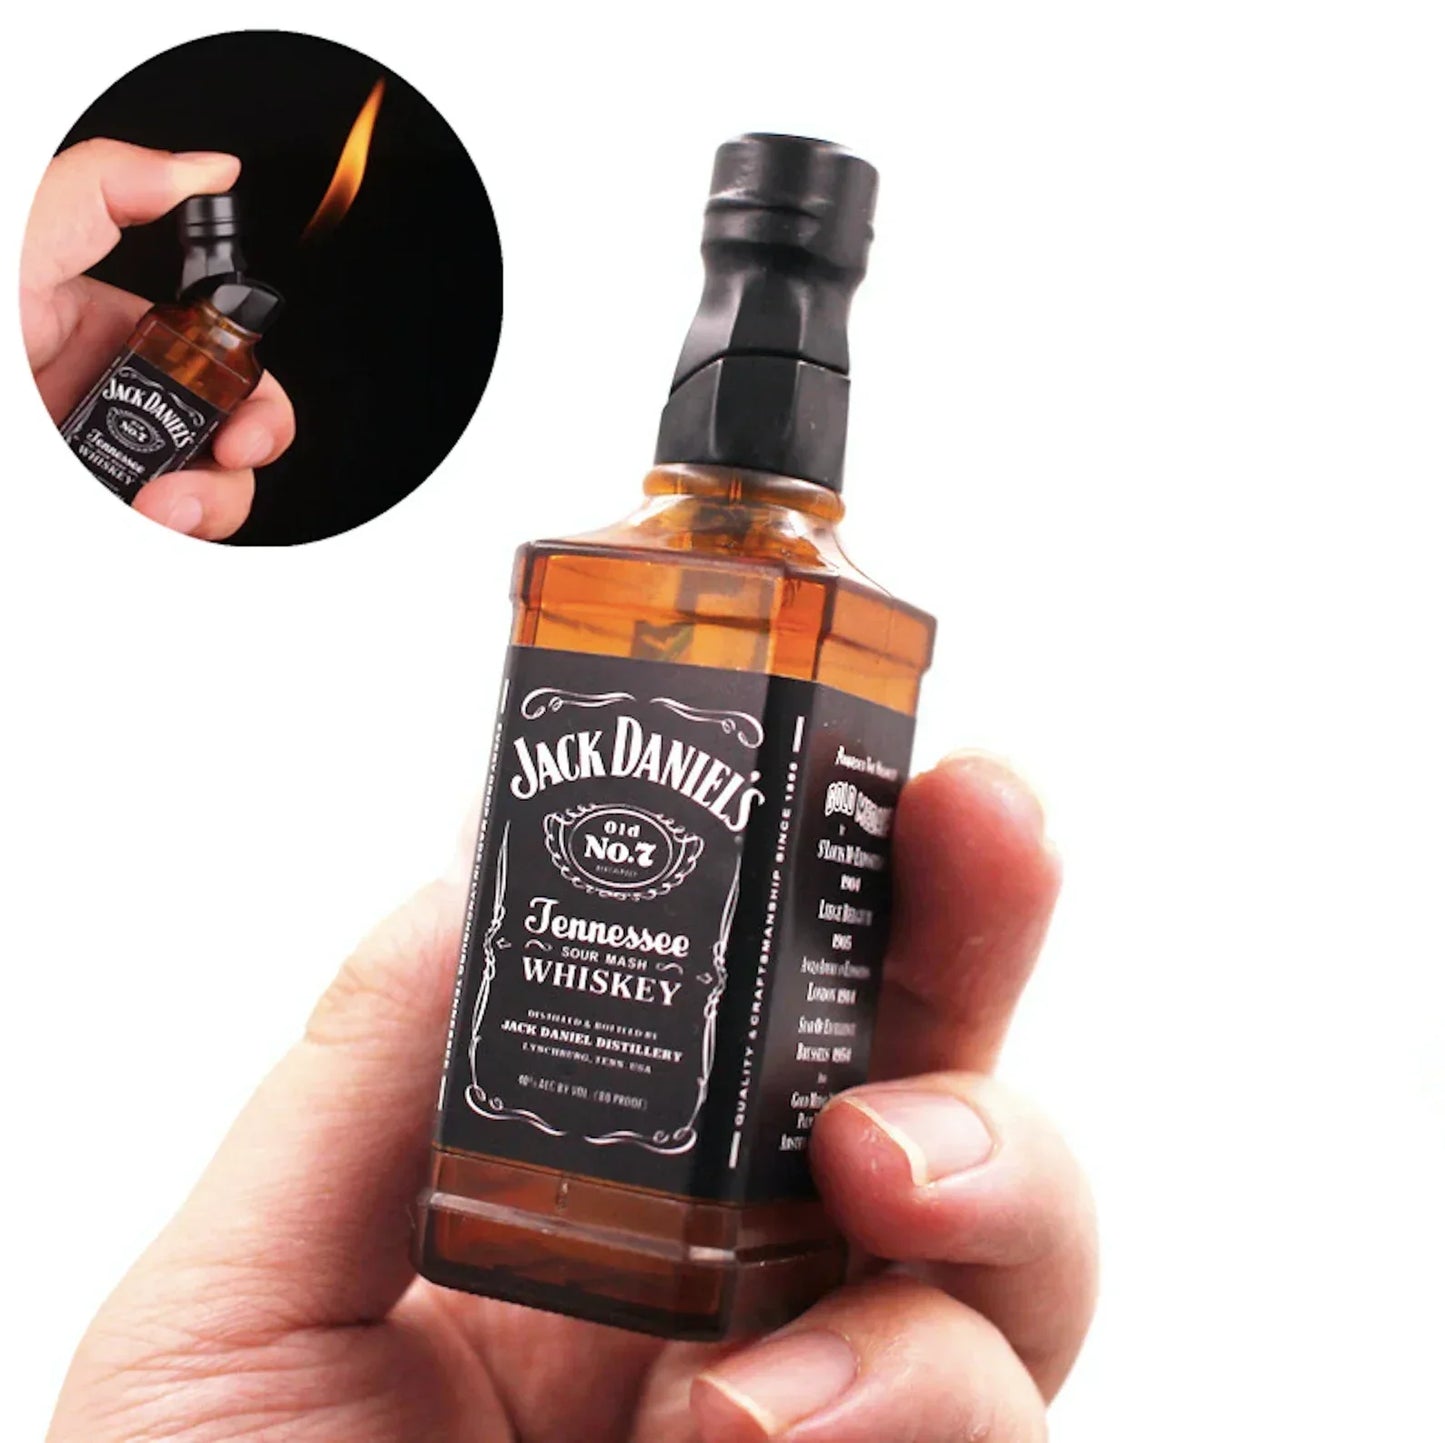 Ignite with the iconic Jack Daniels lighter